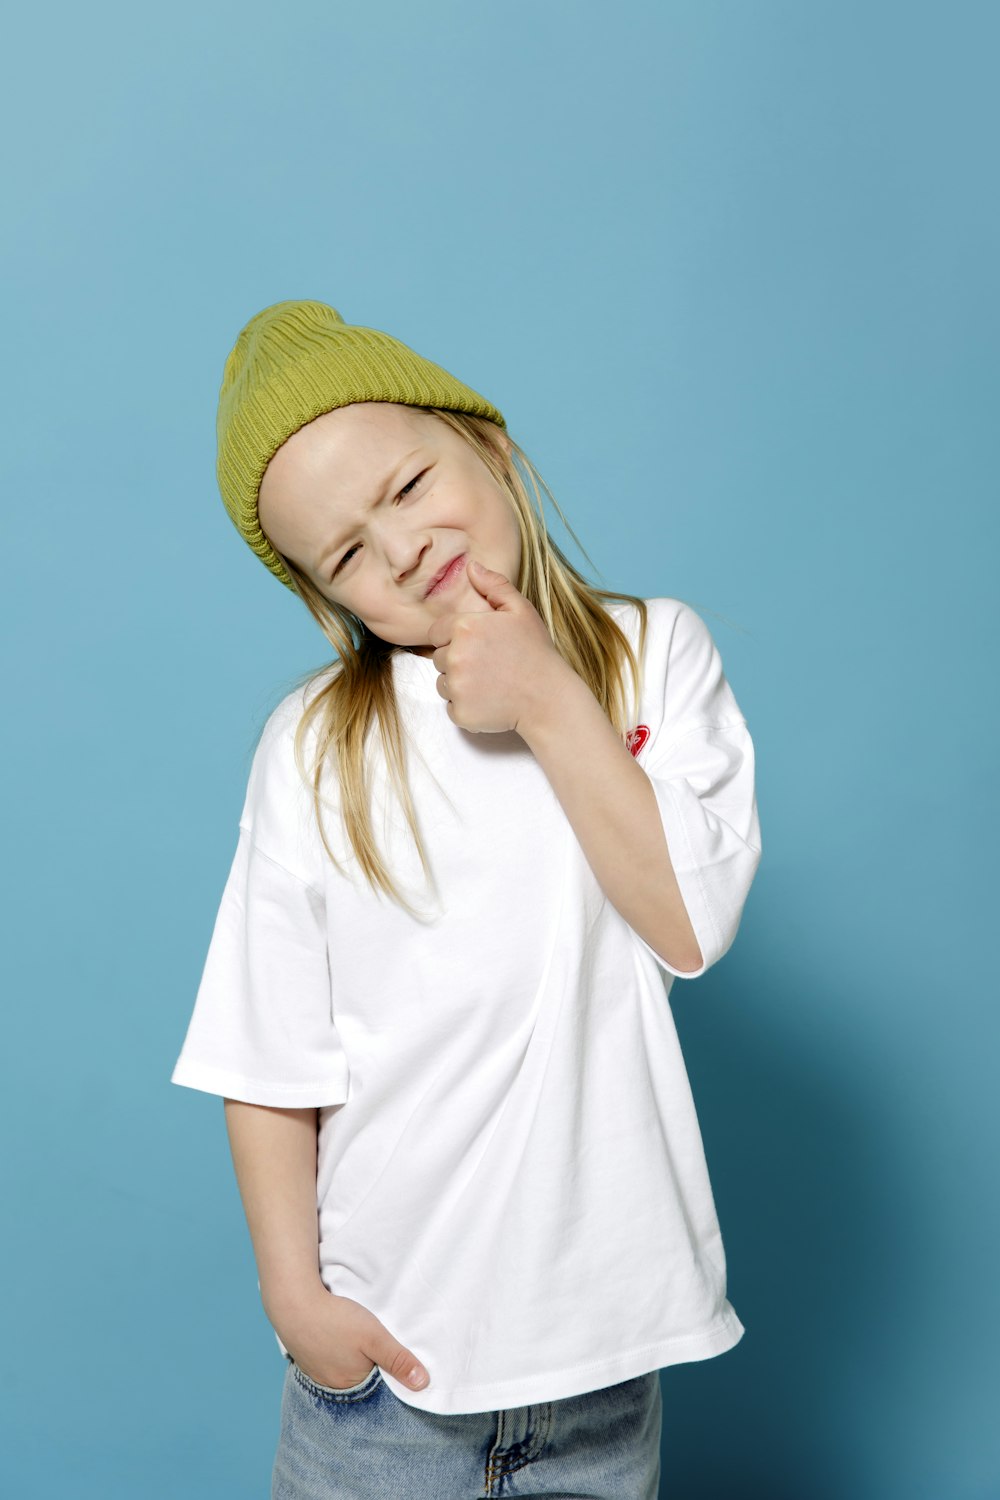 a young girl wearing a green hat posing for a picture